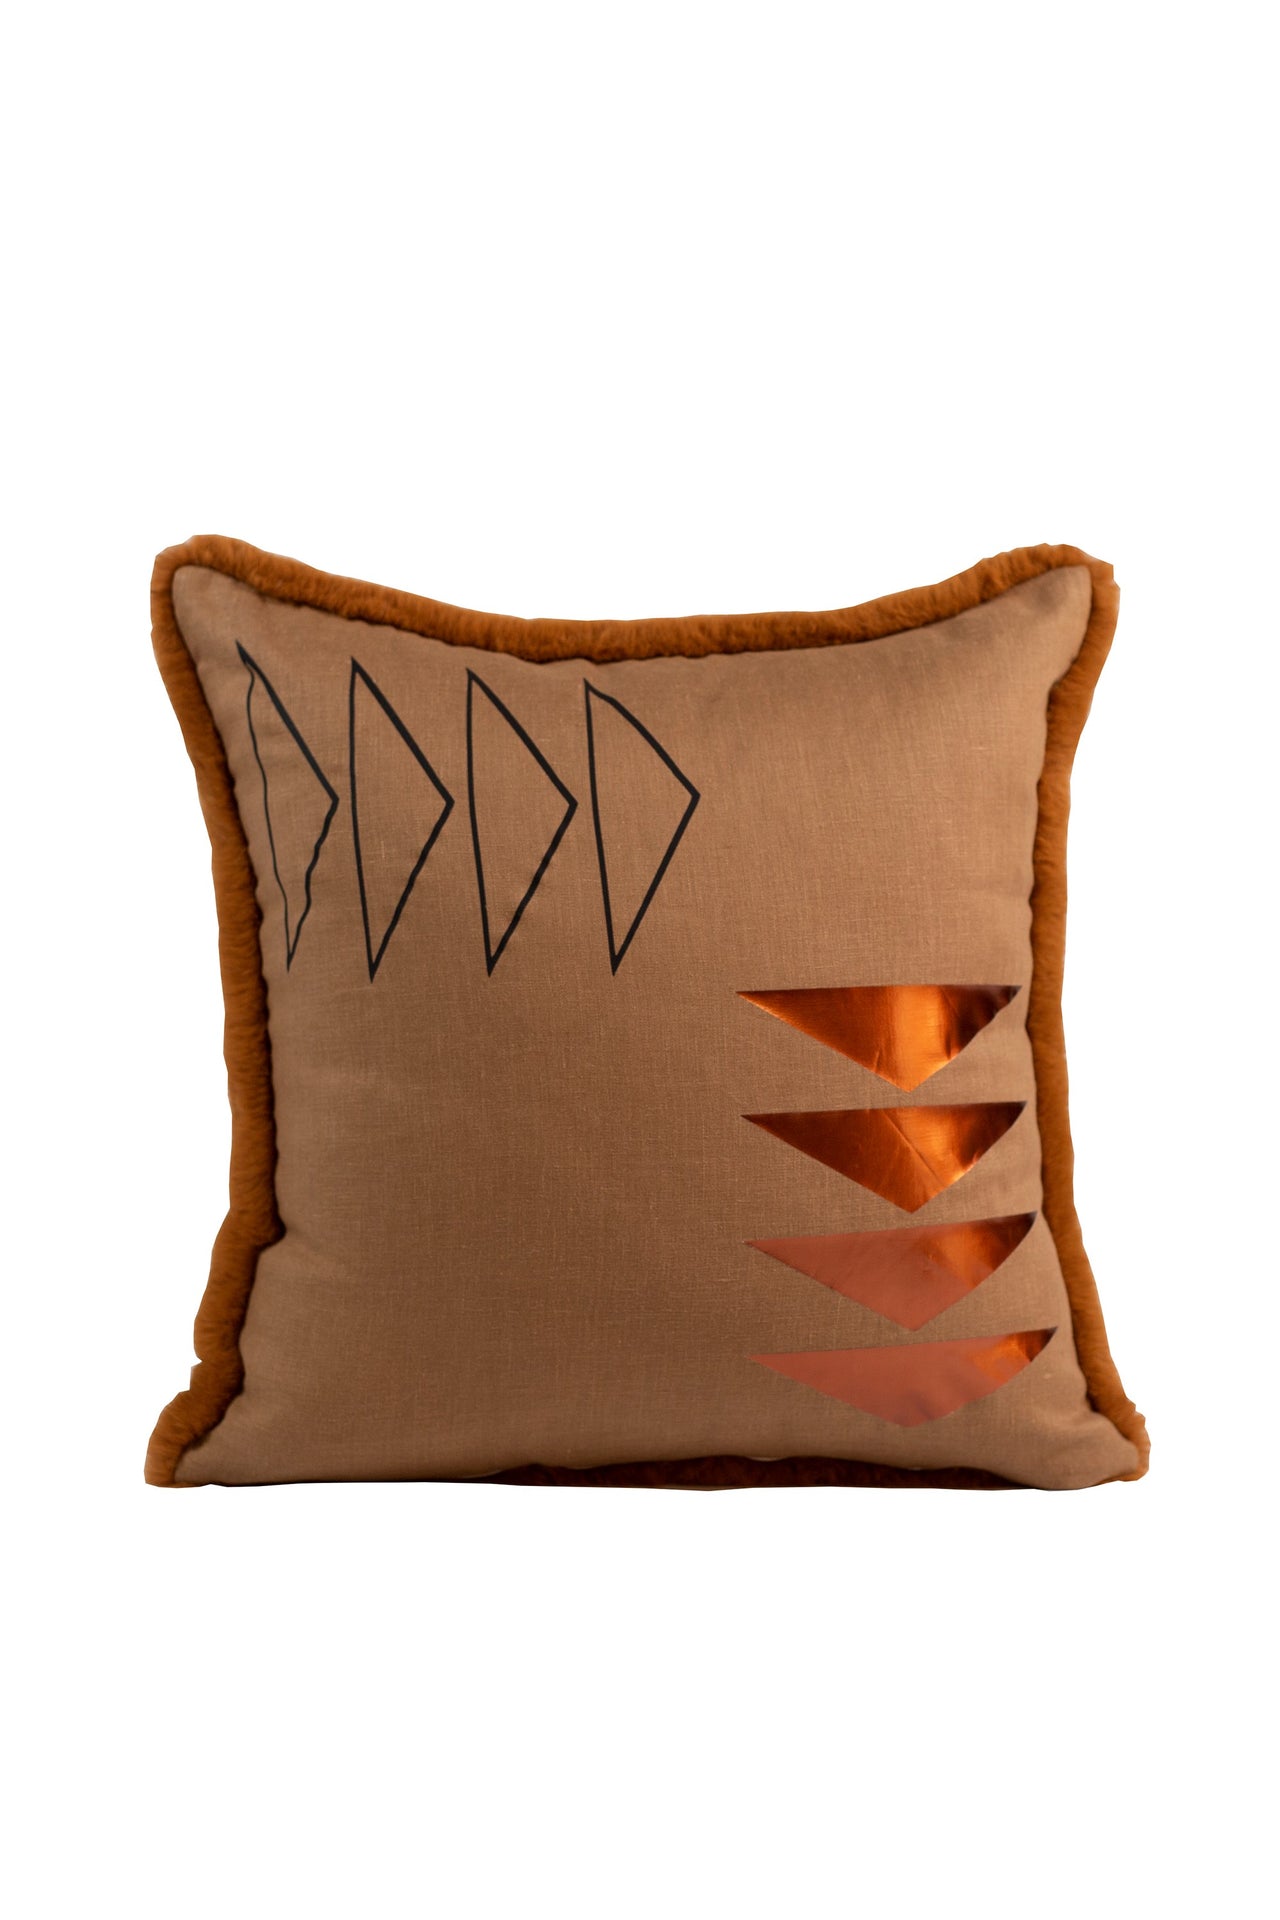 Made in Canada, Indigenous designed linen and faux fur throw pillows.